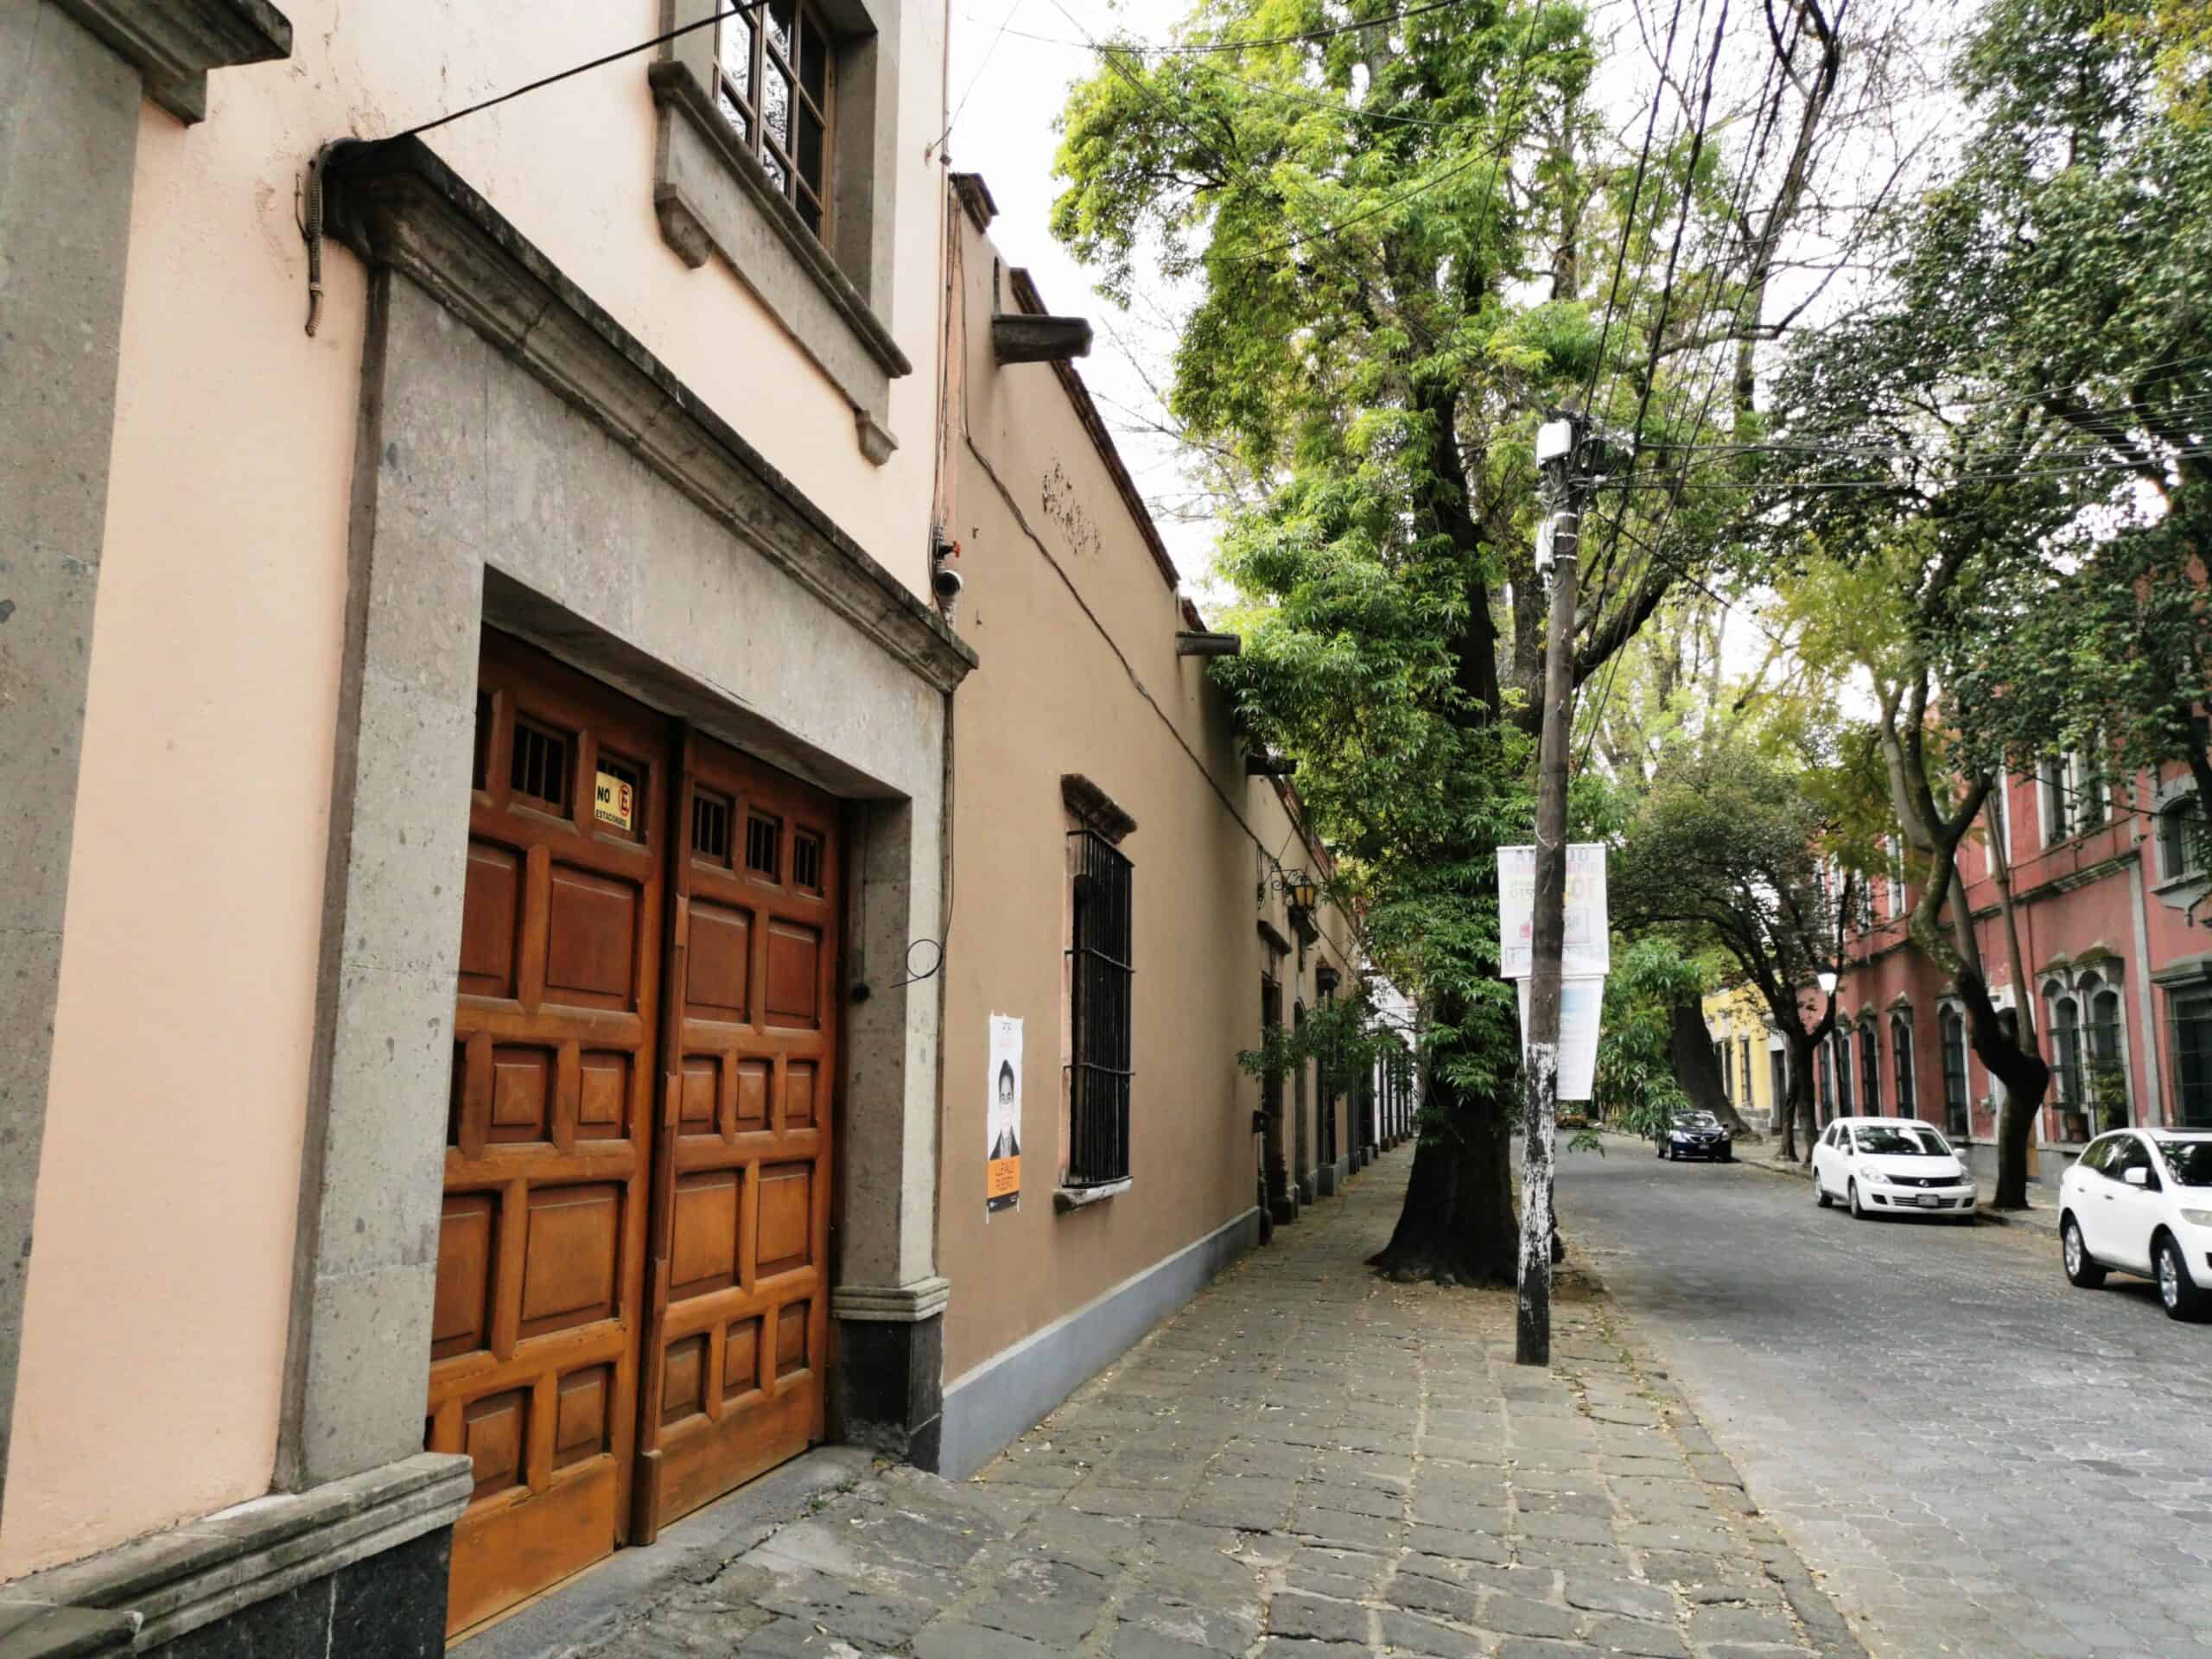 Best things to do in Mexico City Mexico - Alex Veka - Colonial streets of Coyoacan